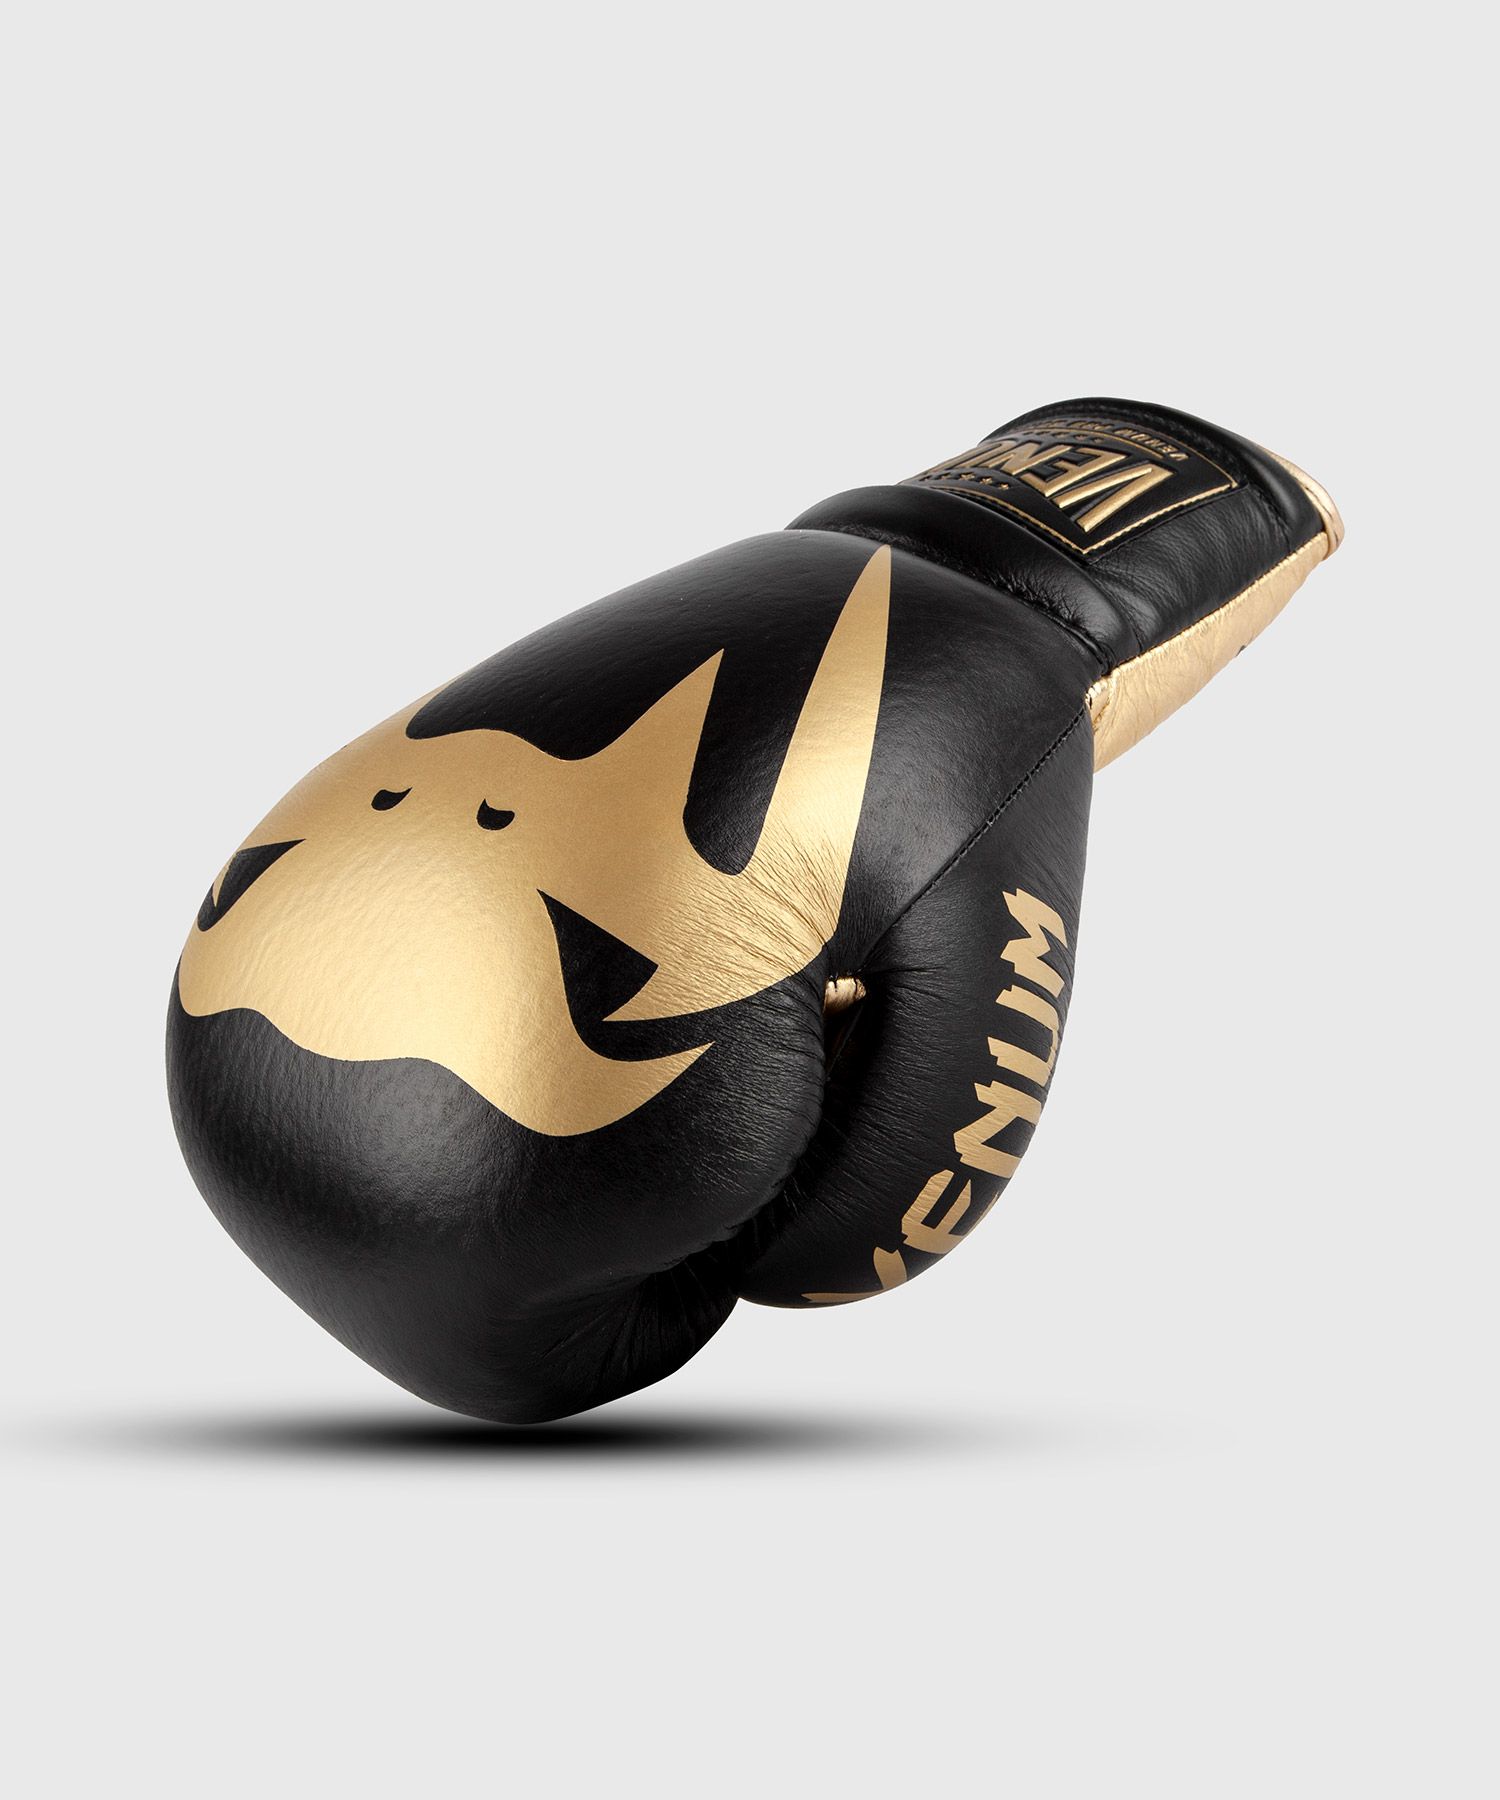 Venum Giant 2.0 Pro Boxing Gloves - With Laces - Black/Gold